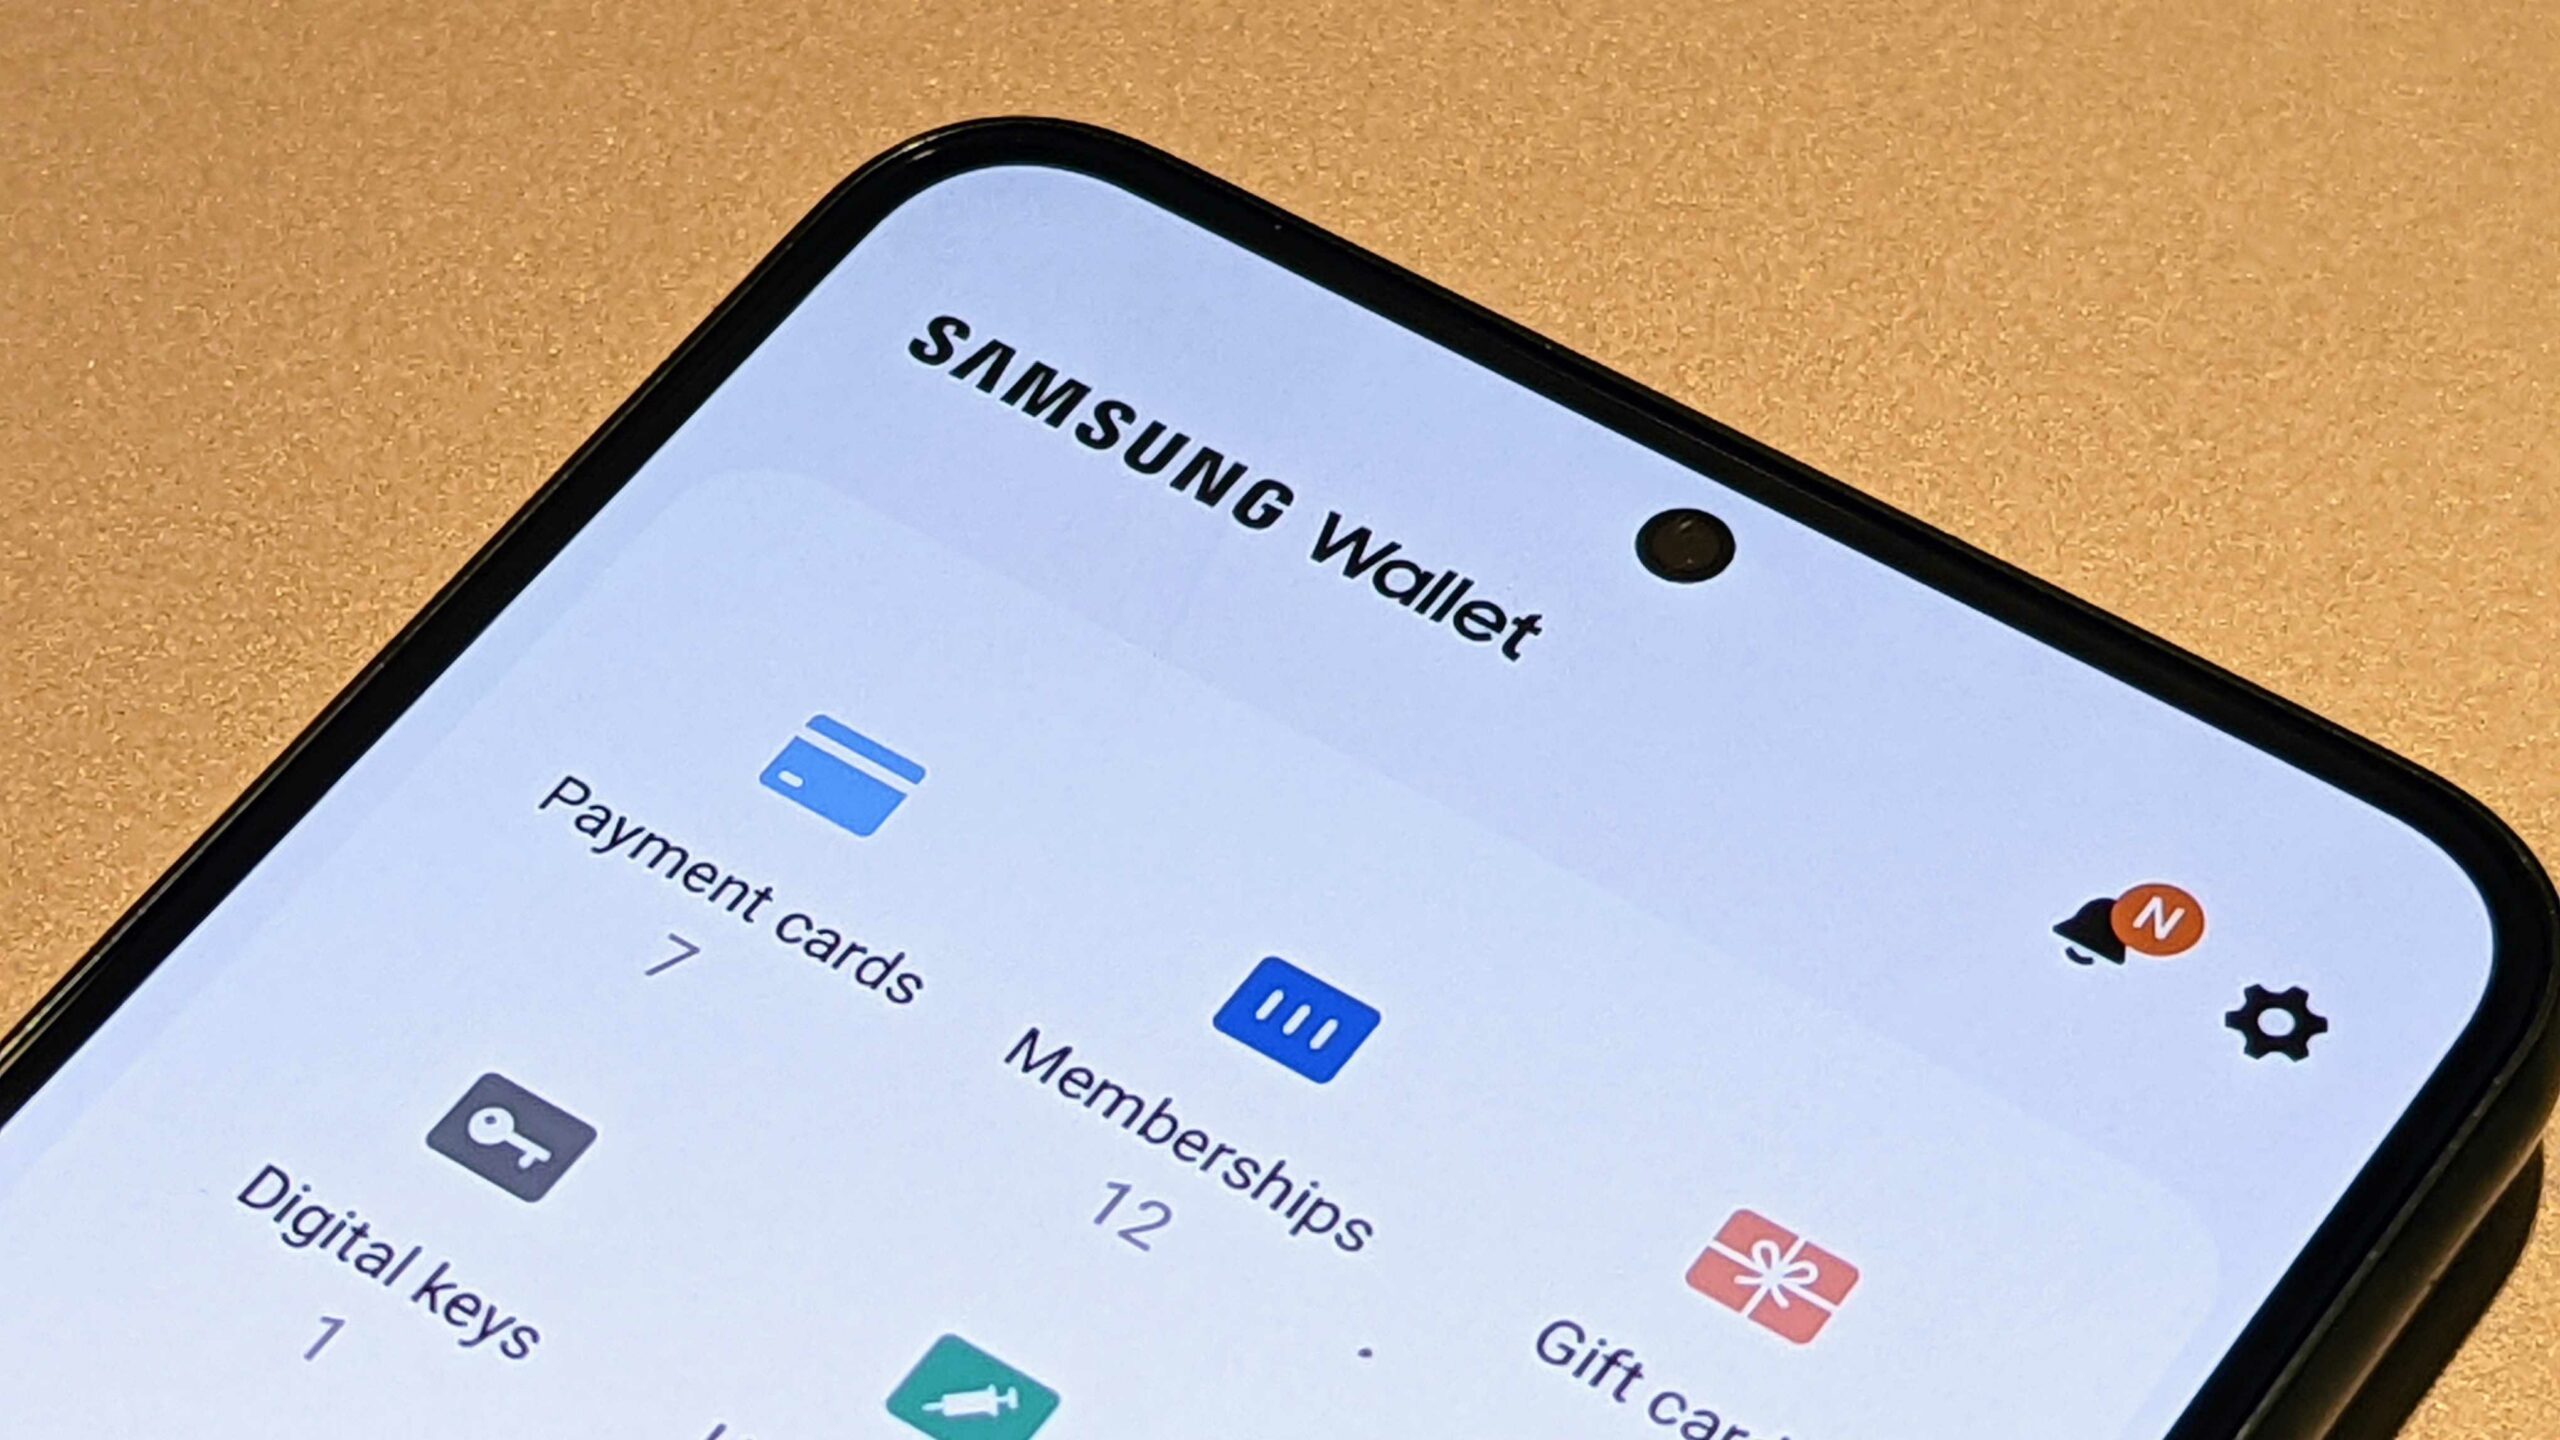 How To Fix Samsung Wallet Not Working